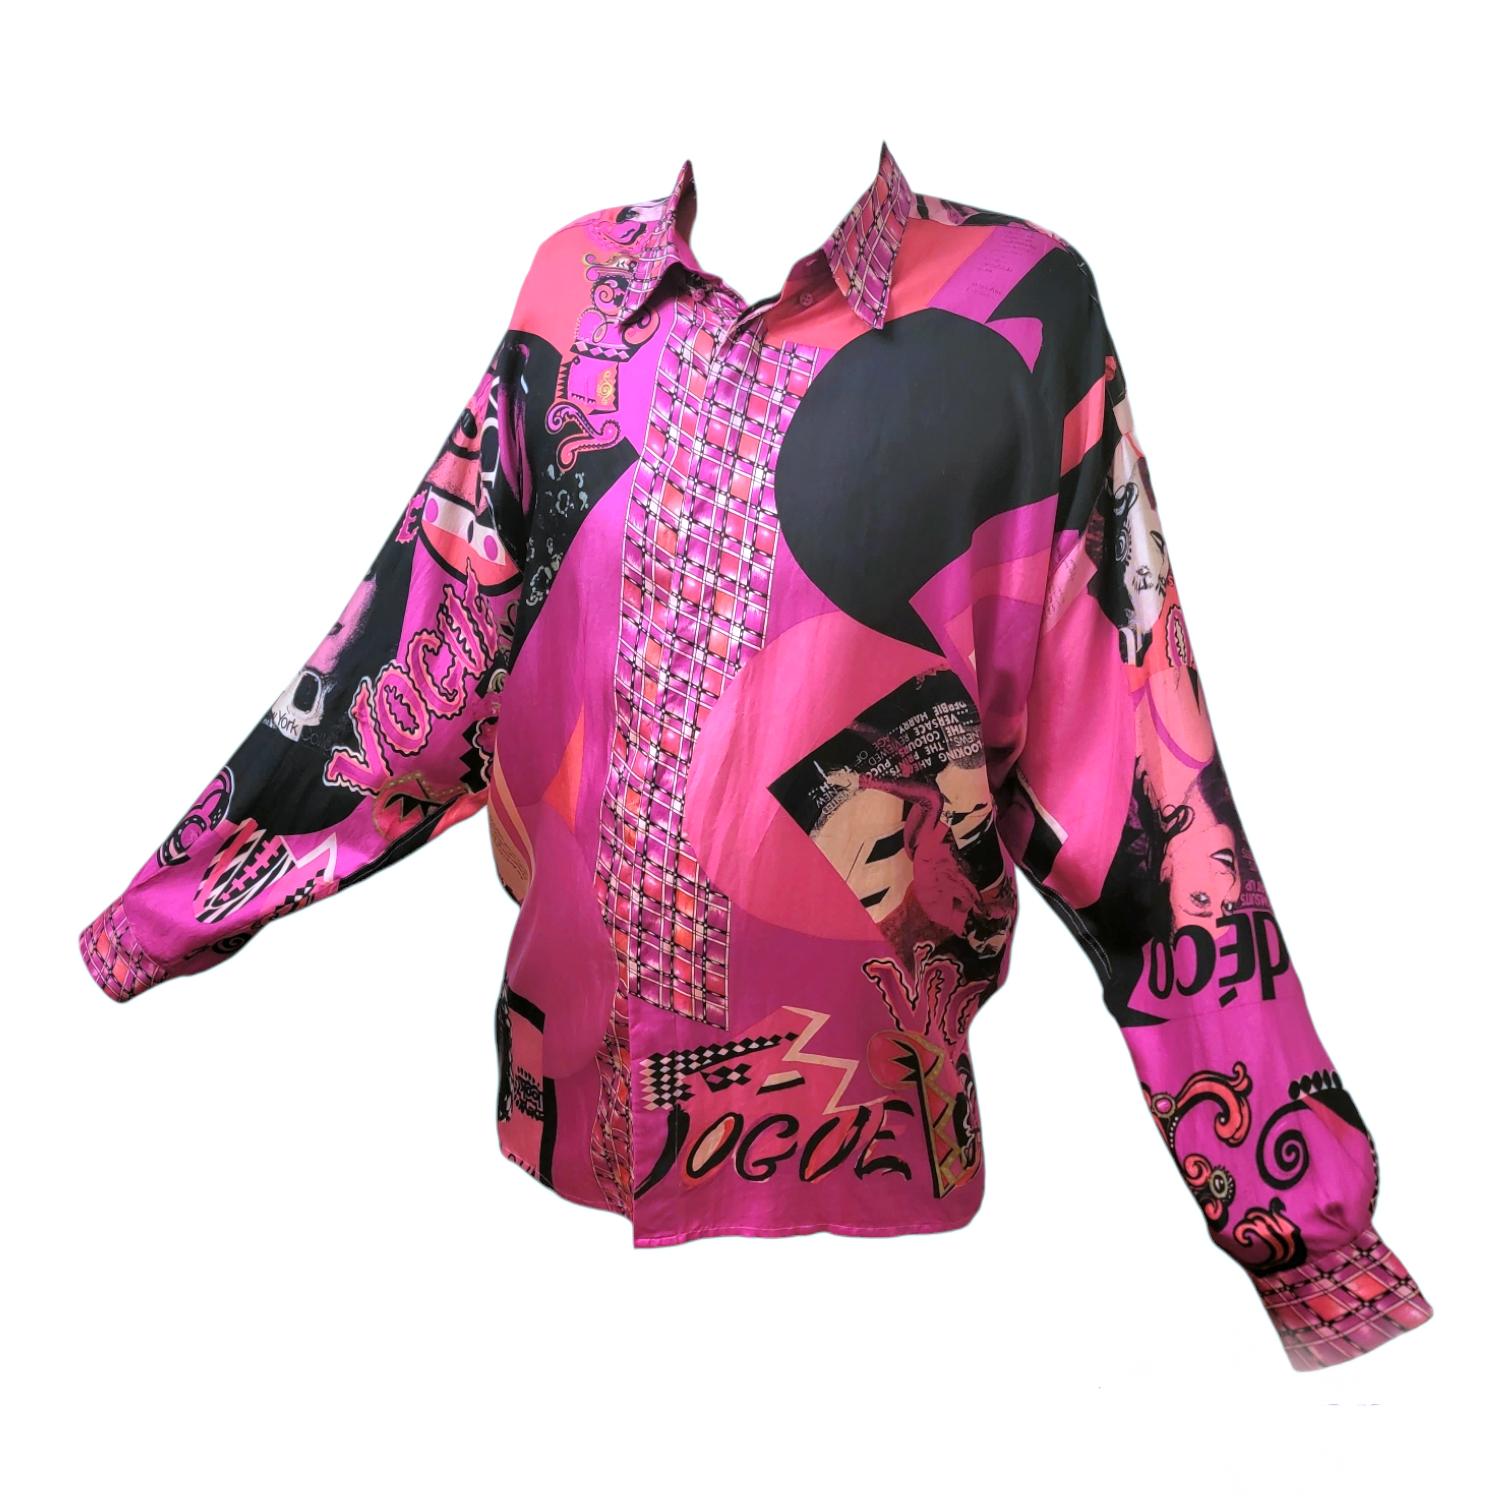 Women's or Men's 1991 Gianni Versace Vogue Magazine Printed Limited Silk Shirt For Sale